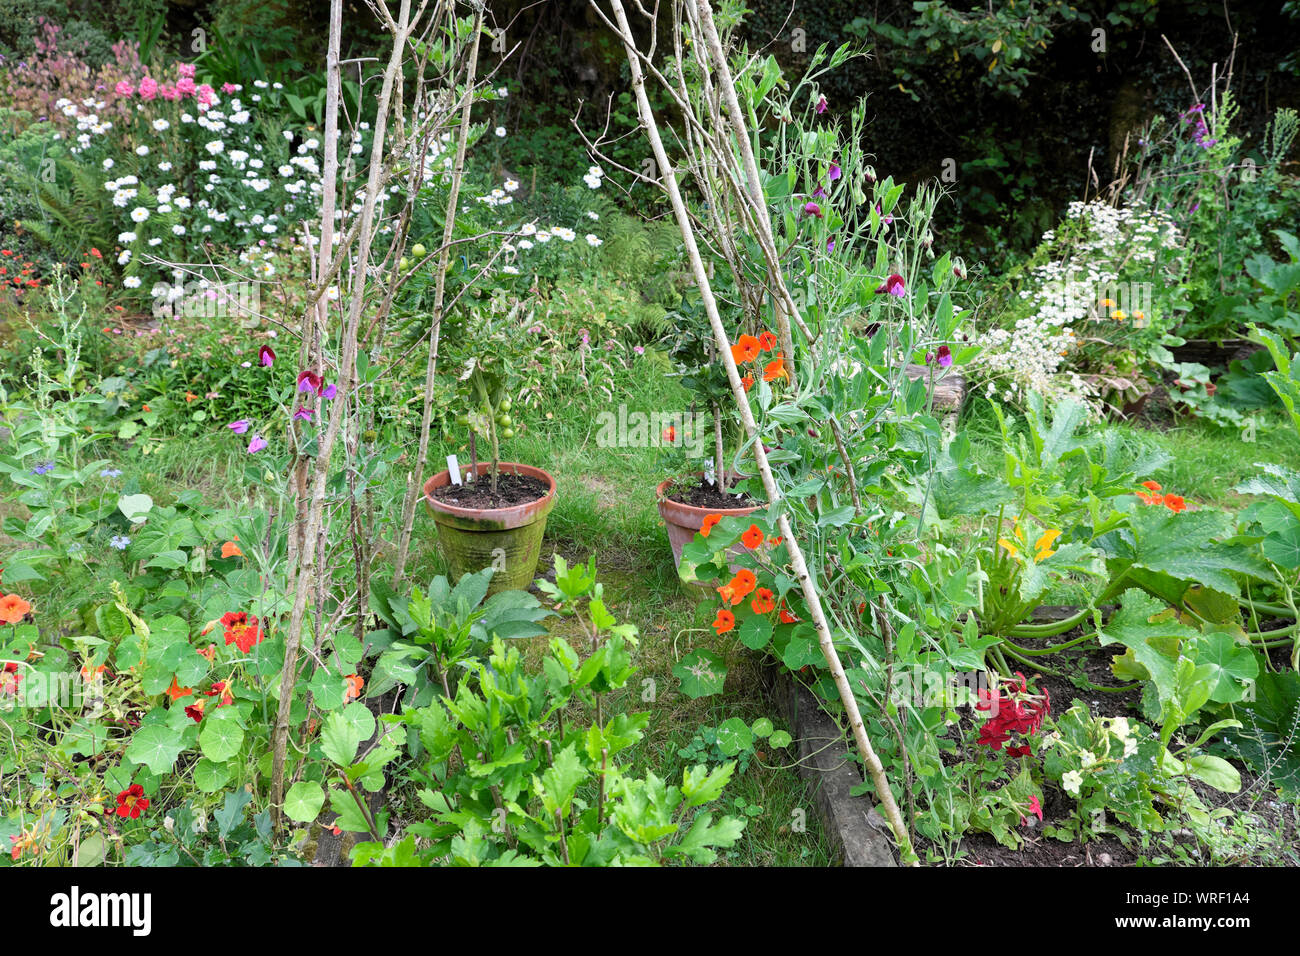 Vegetables and flowers growing on pea sticks in a backyard country garden on a sunny day in summer August 2019  Carmarthenshire Wales UK  KATHY DEWITT Stock Photo